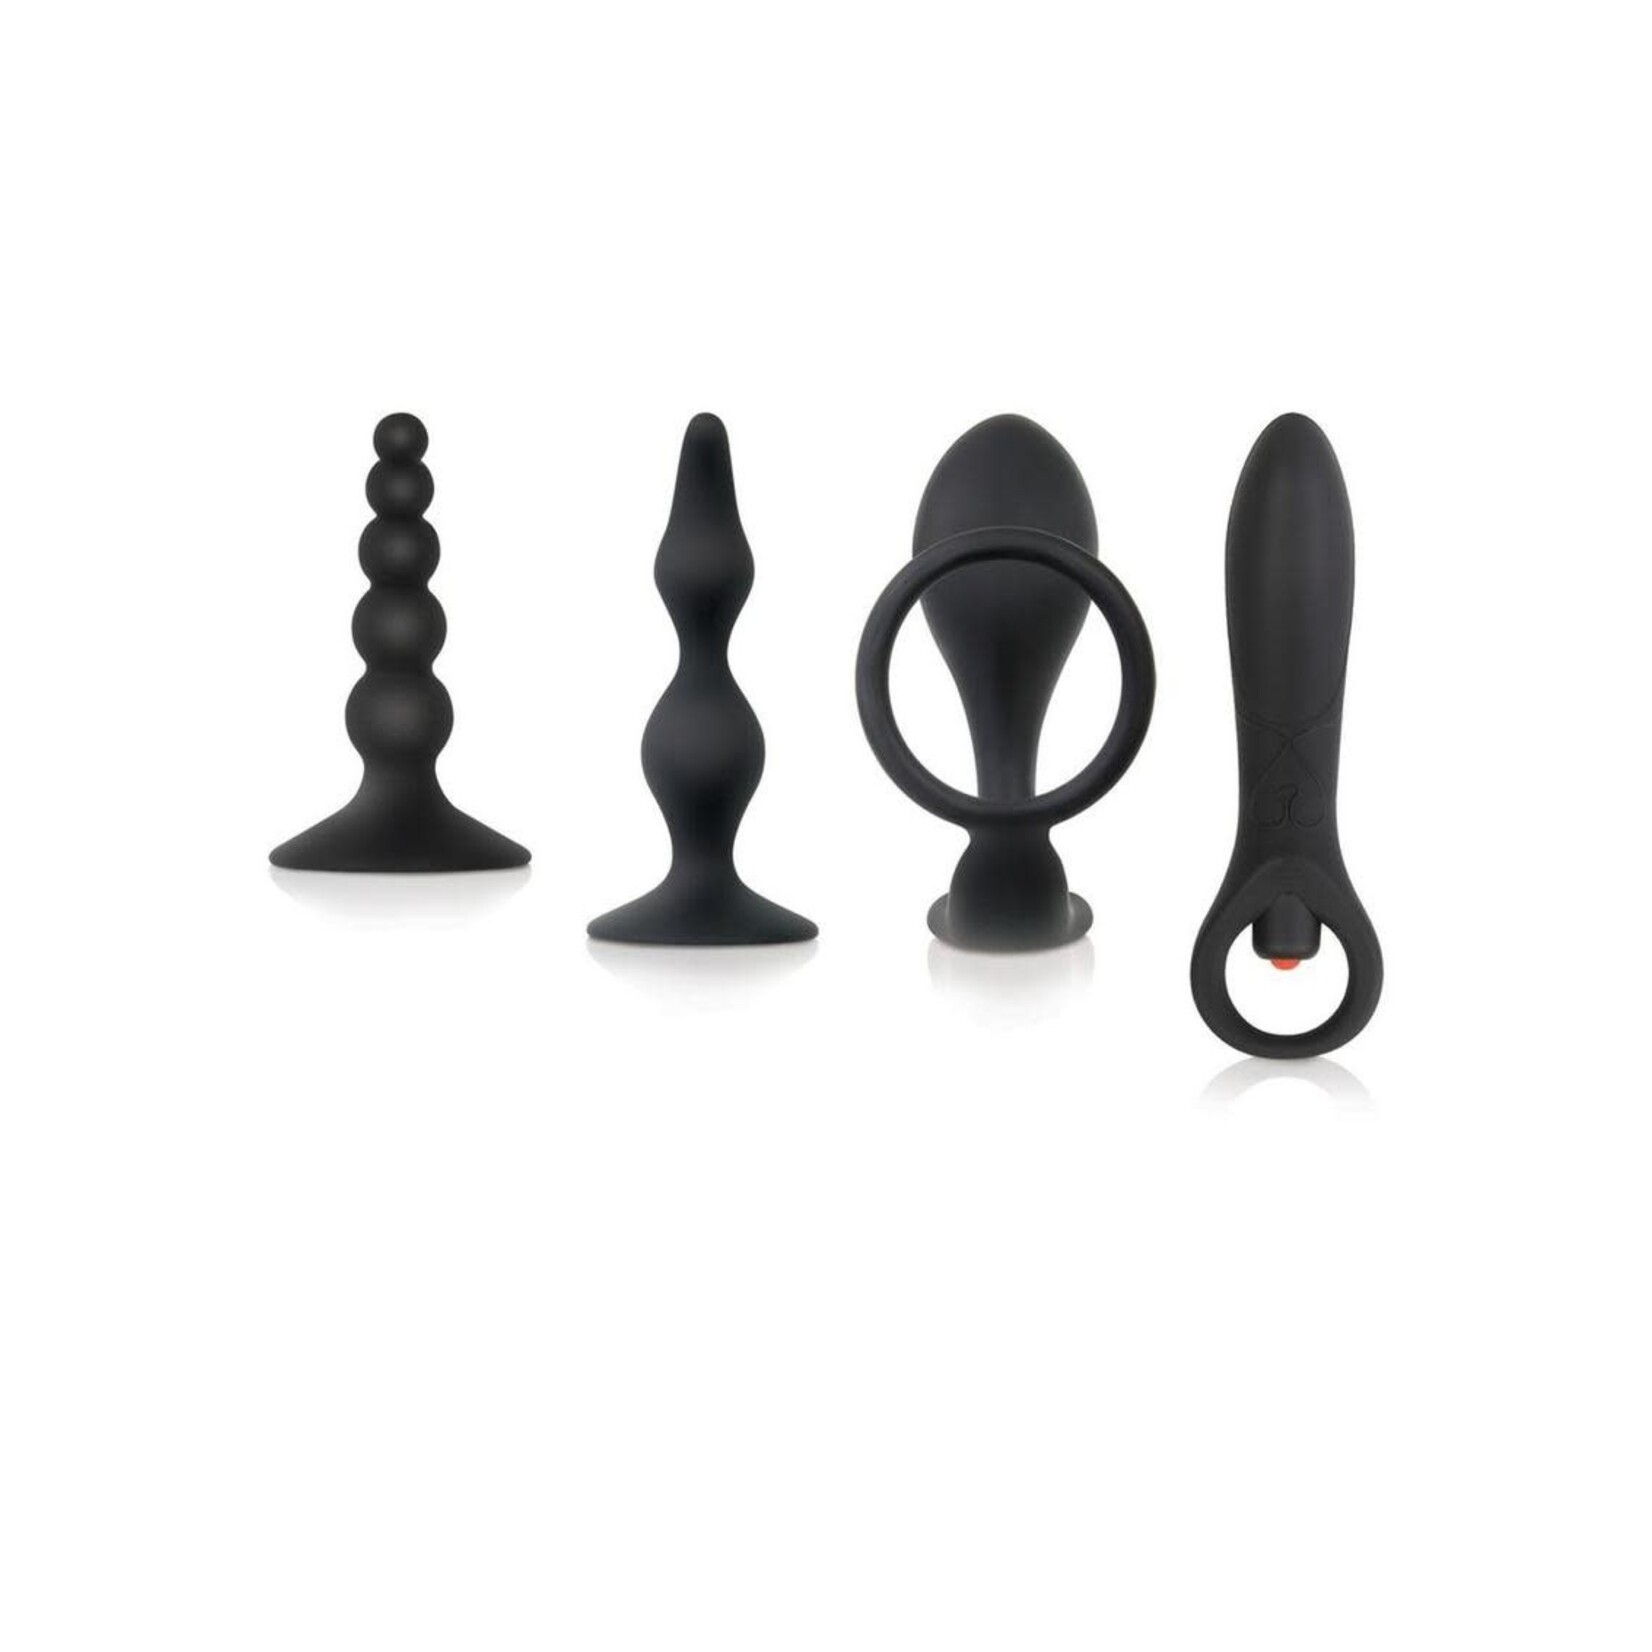 Zero Tolerance Intro To Prostate Silicone With Movie And Lube (4Piece Kt) - Black